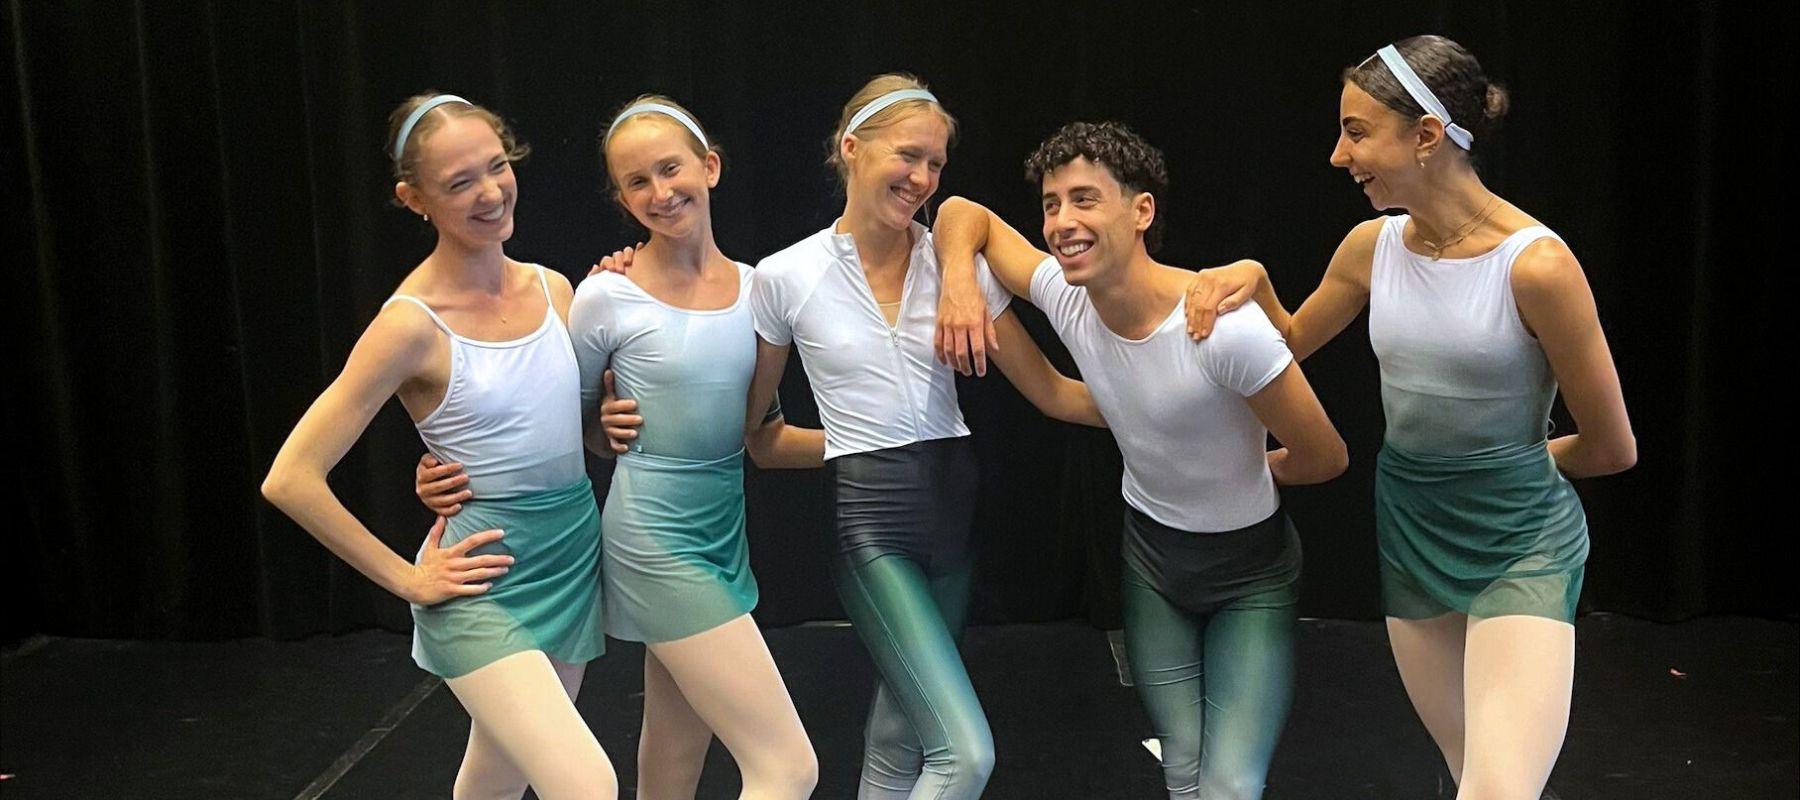 Imperfect Pointes takes to the stage in Copenhagen Made choreography competition - Imperfect Pointes News